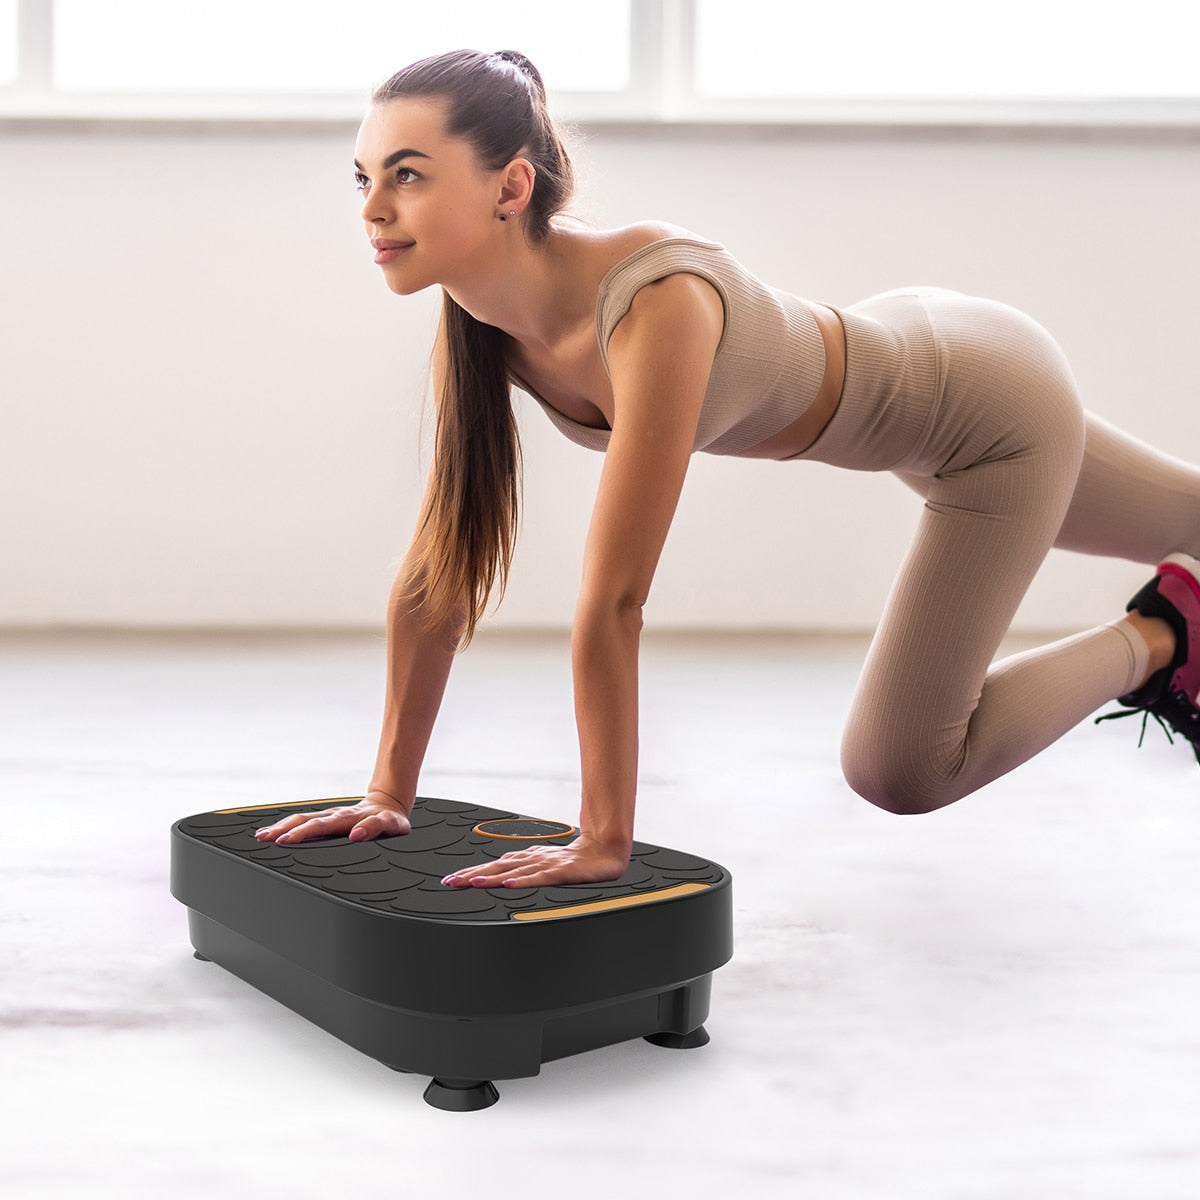 RELIFE Vibration Platform for Shaping and Toning